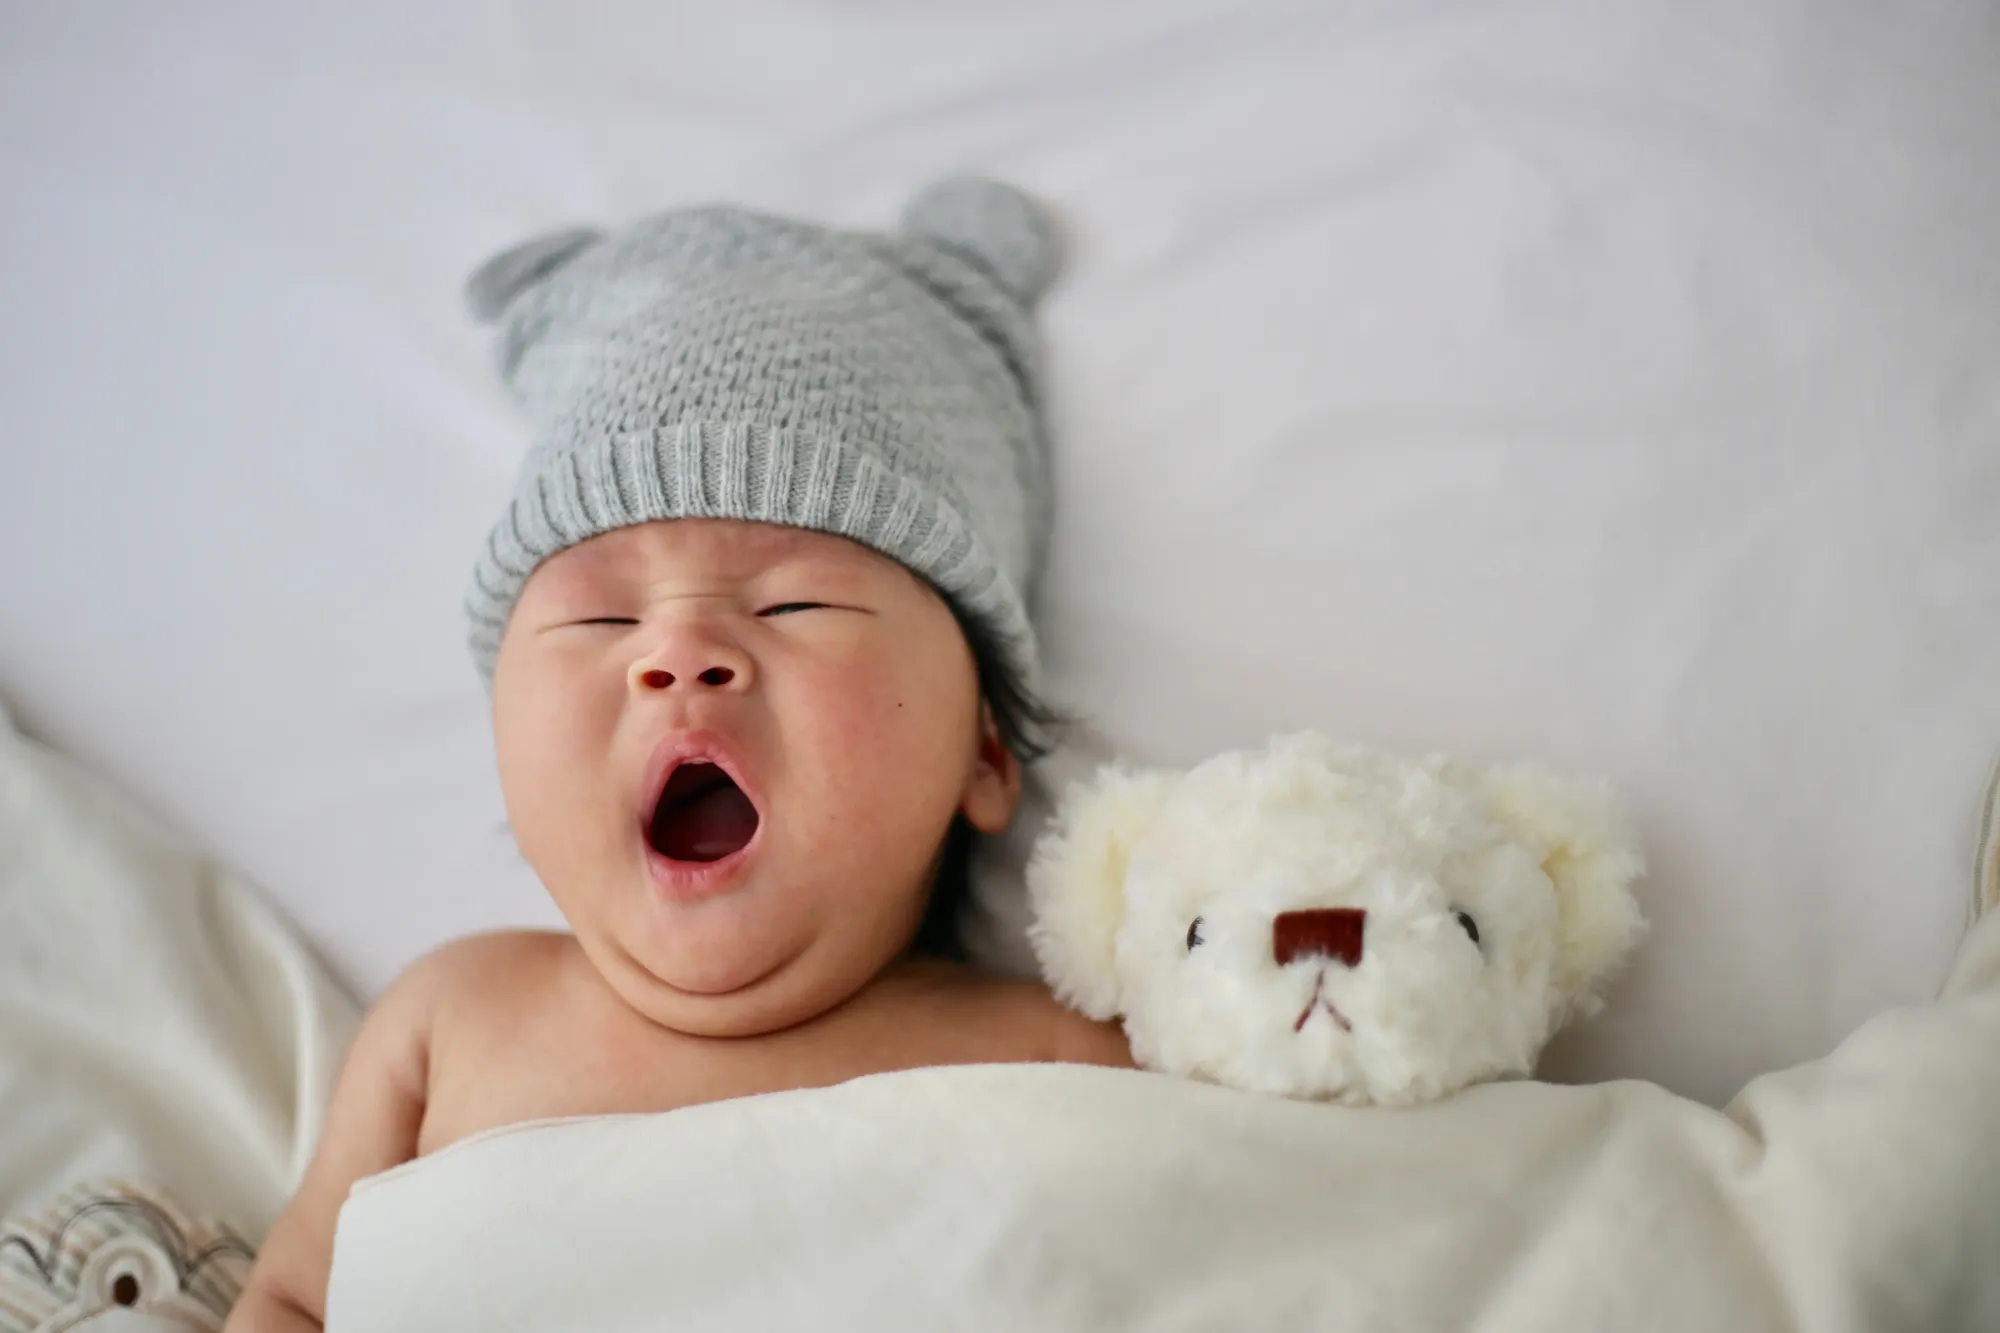 yawning baby, baby with teddy